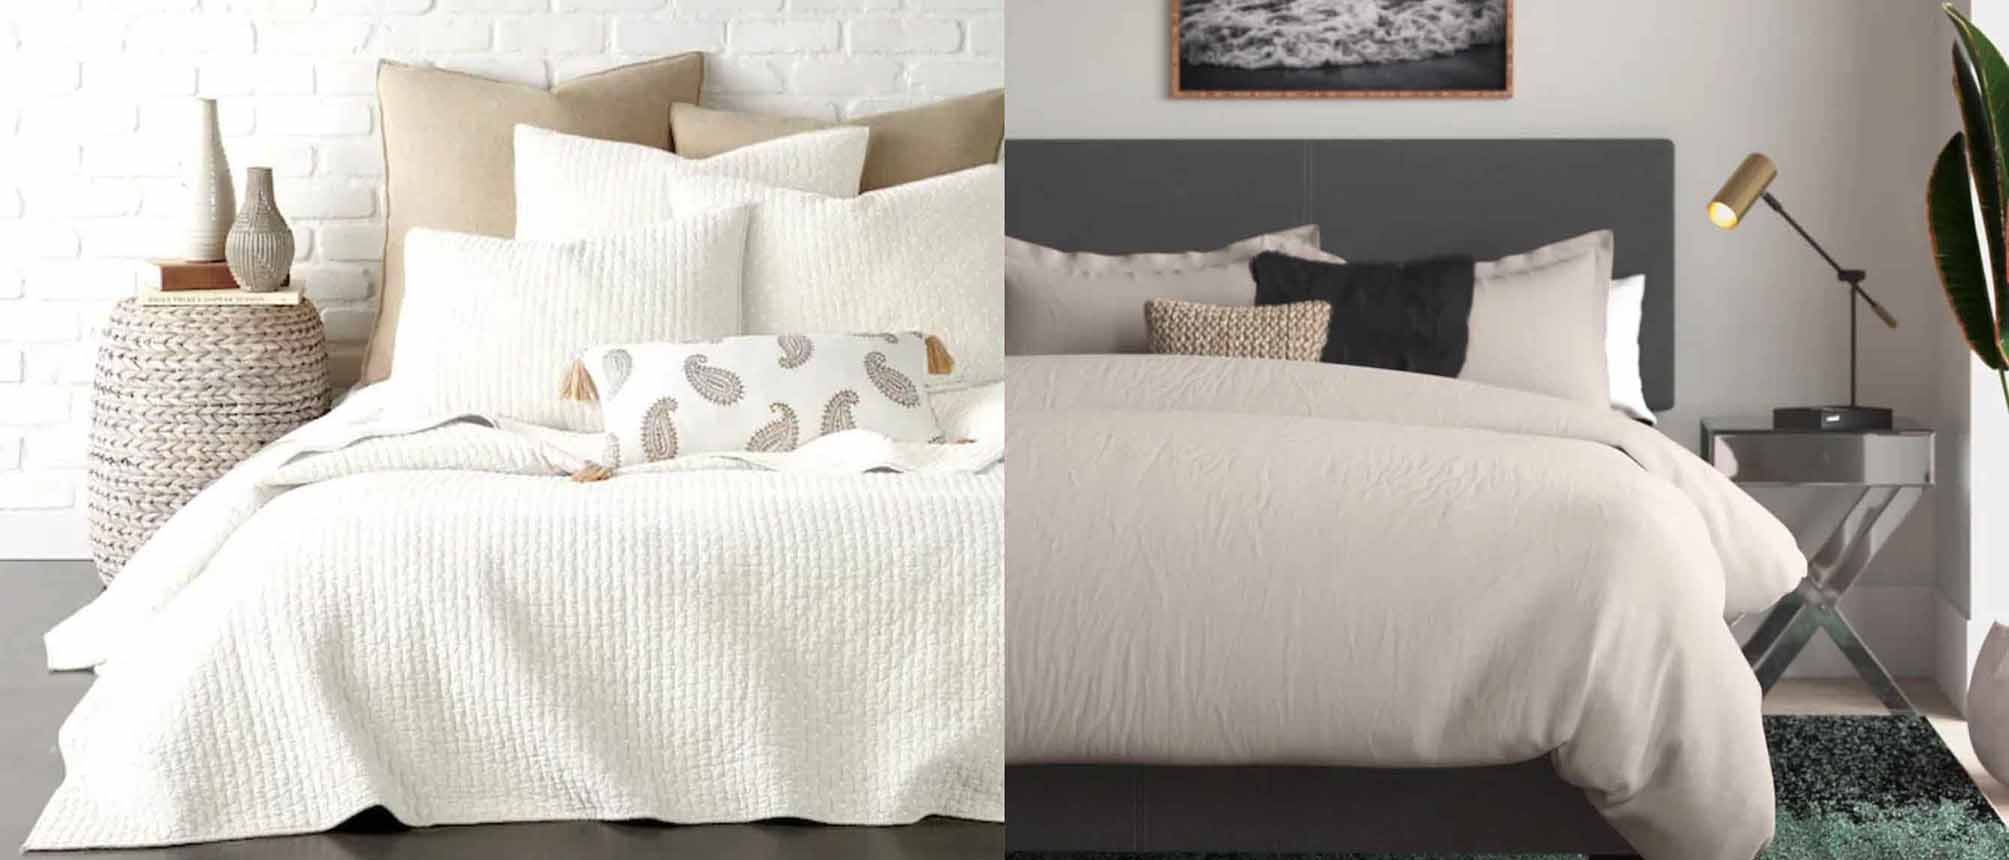 Image of two types of bedding set in different settings